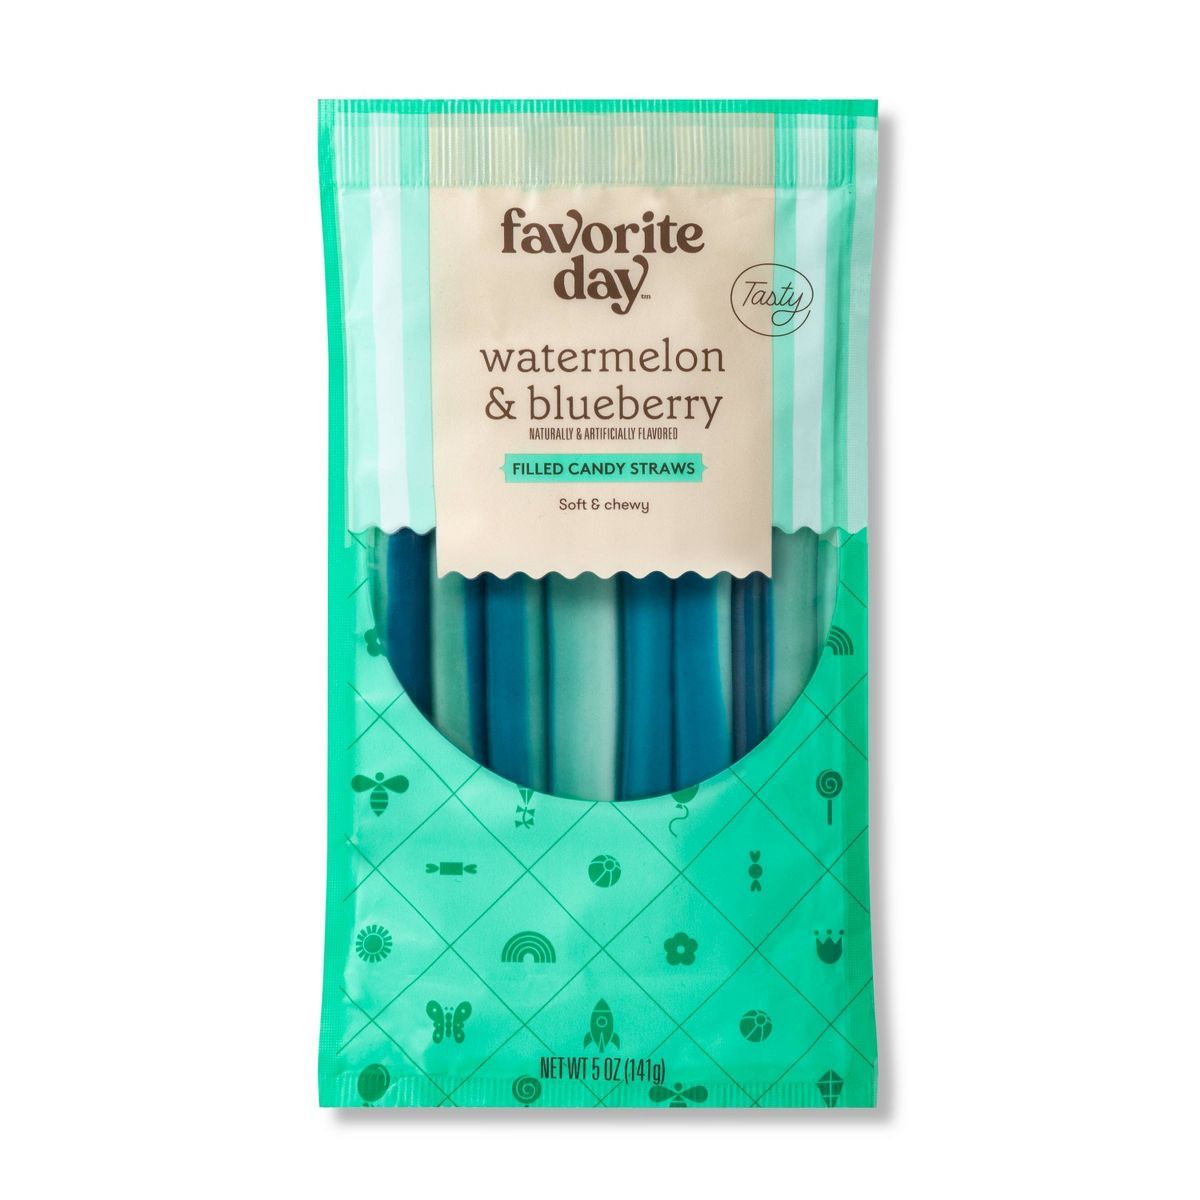 Filled Candy Straws Watermelon & Blueberry - 5oz - Favorite Day™ | Target